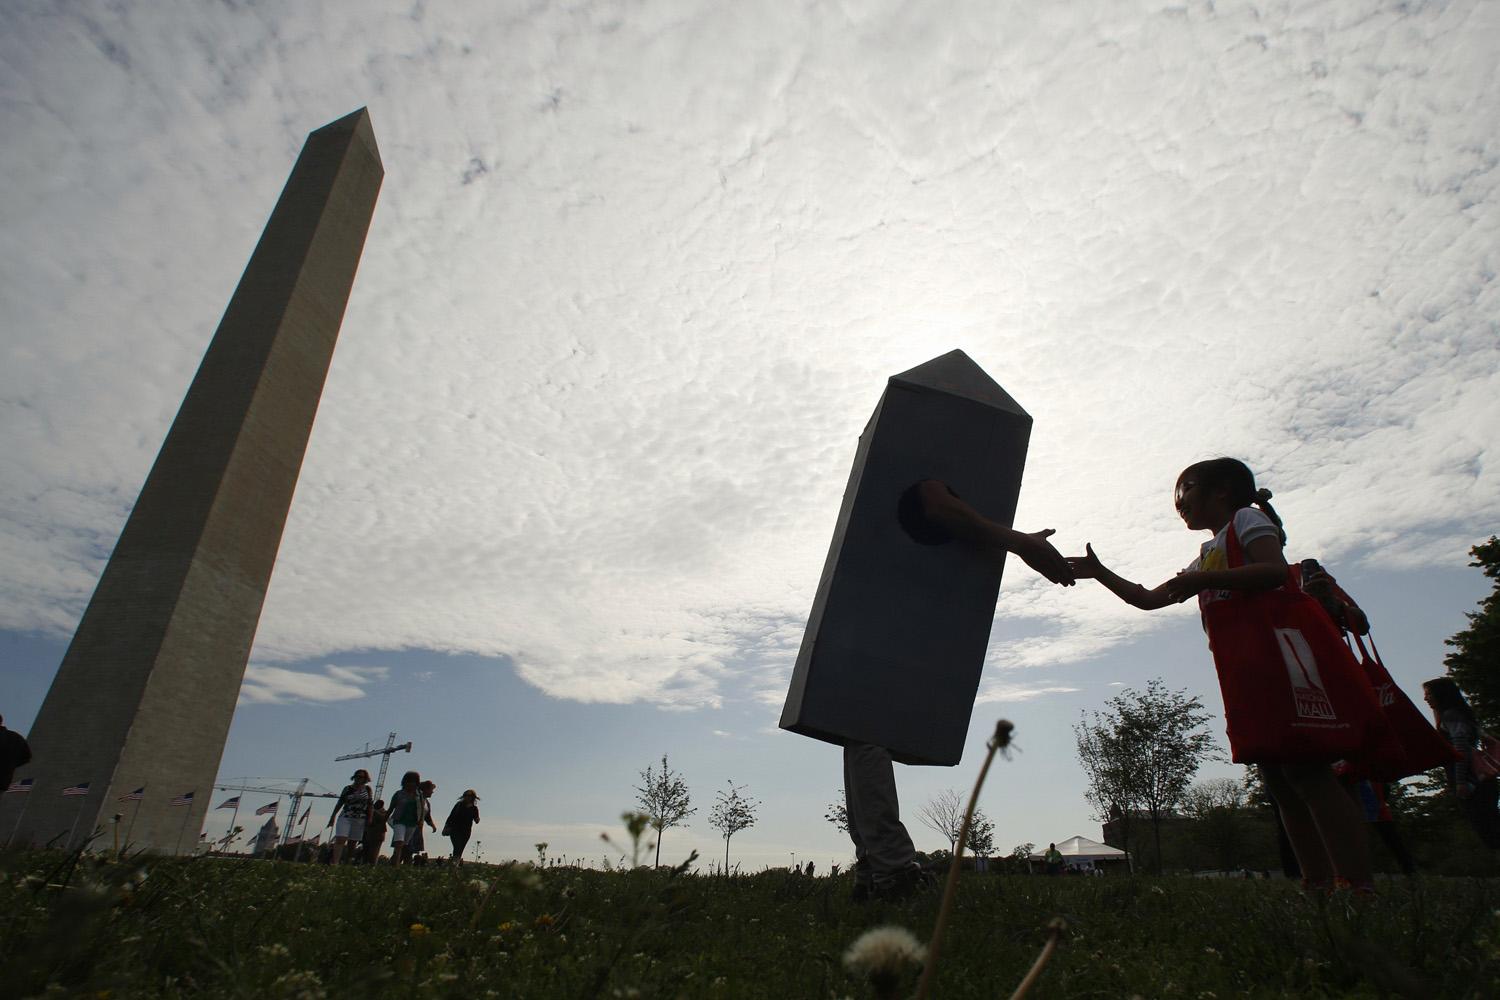 A girl shakes hands with a man dressed as the Washington Monument at the monument's re-opening ceremony in Washington, D.C., on May 12, 2014.